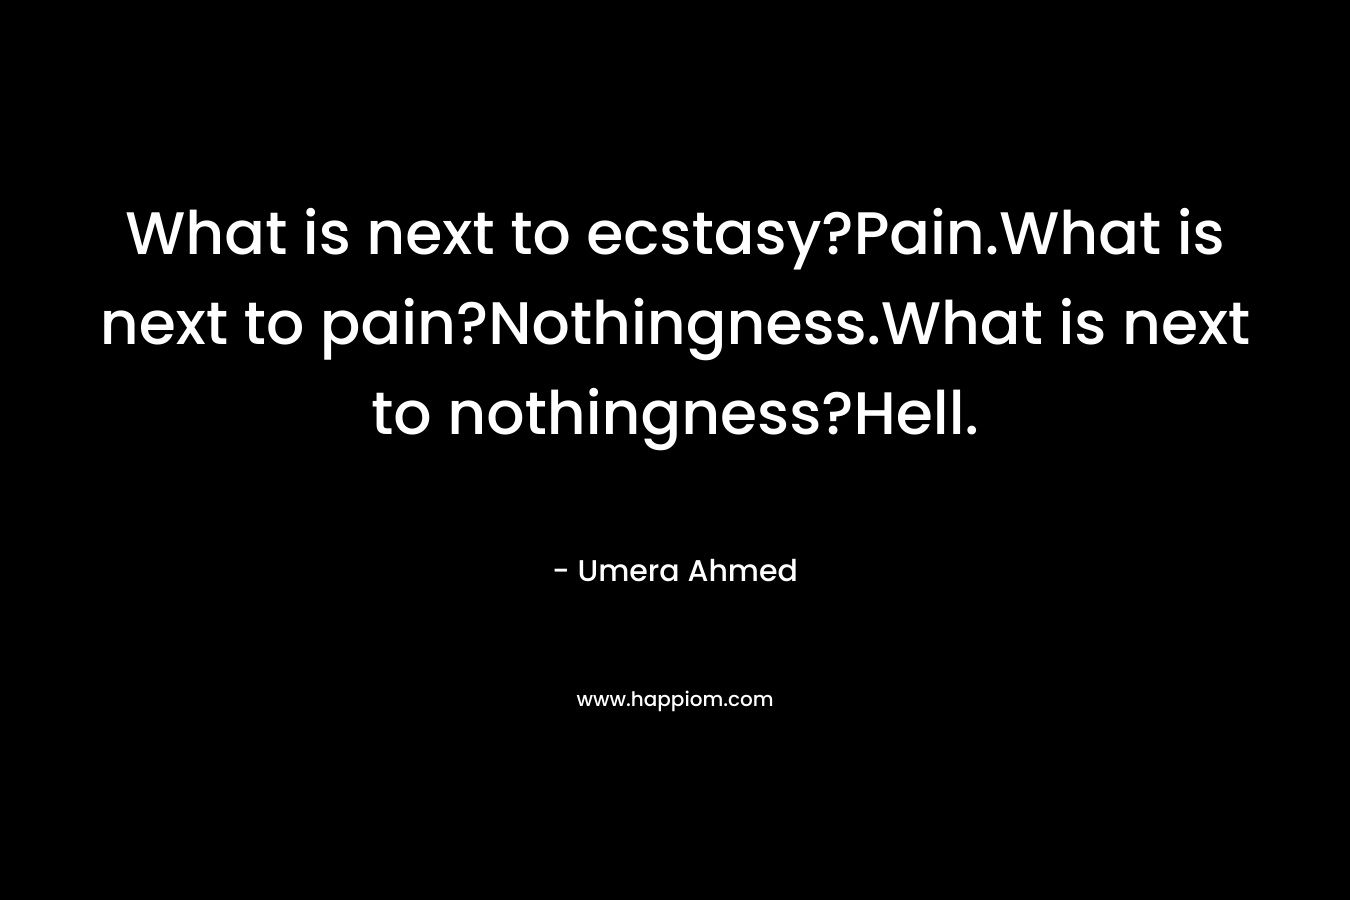 What is next to ecstasy?Pain.What is next to pain?Nothingness.What is next to nothingness?Hell.